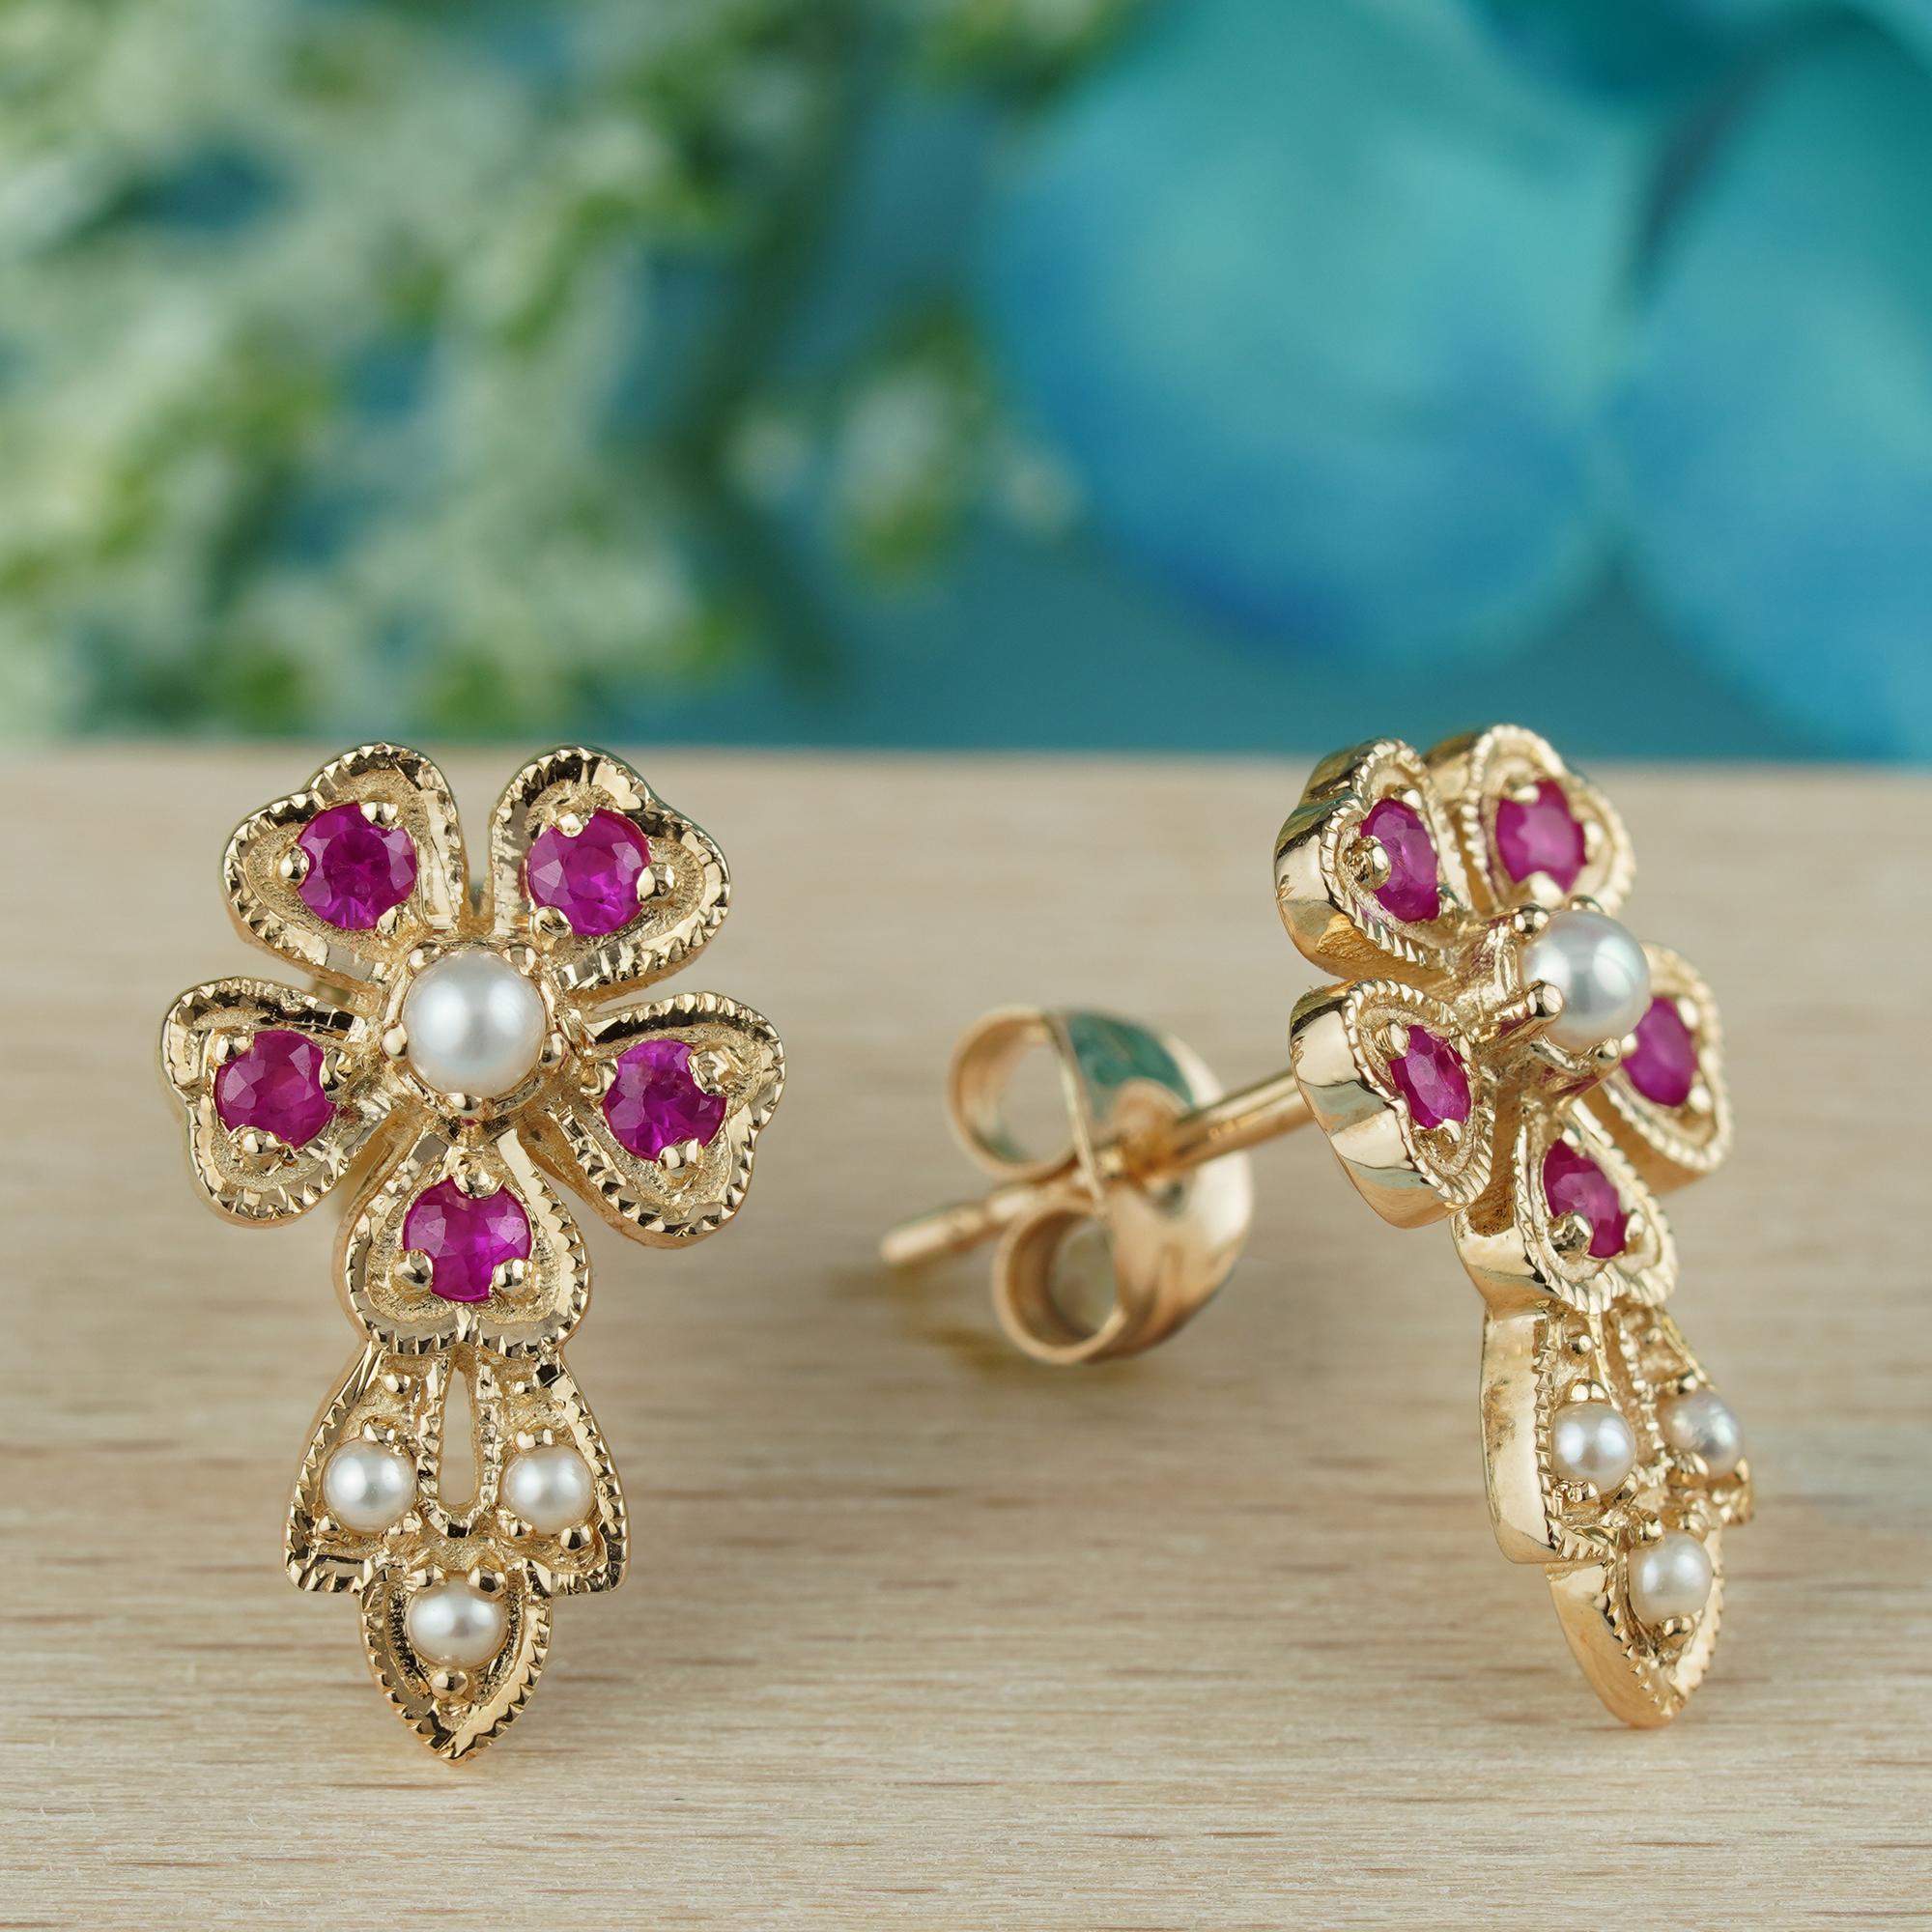 Add a delicate and unique aesthetic to your look with this earrings by GEMMA FILIGREE. Our antique design gold earrings equate to delicacy and light openwork, while maintains strength for everyday wear for a lifetime.
This lovely design earrings